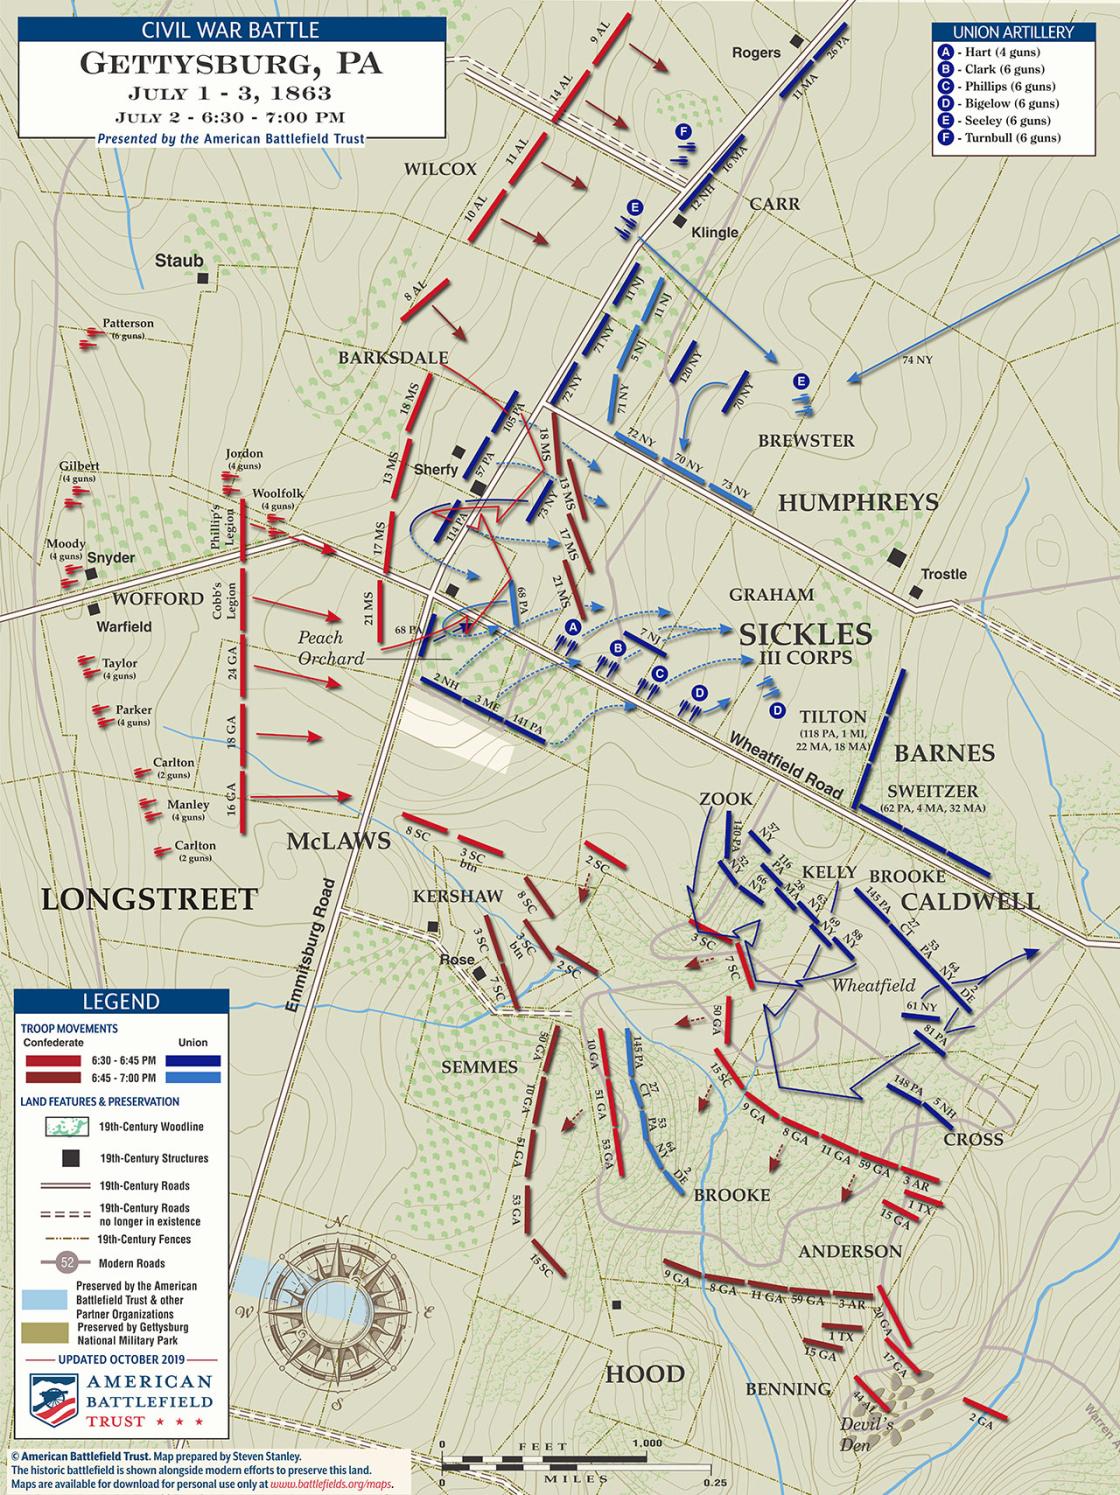 Gettysburg | The Wheatfield & Peach Orchard | July 2, 1863 | 6:30 - 7 pm (October 2019)